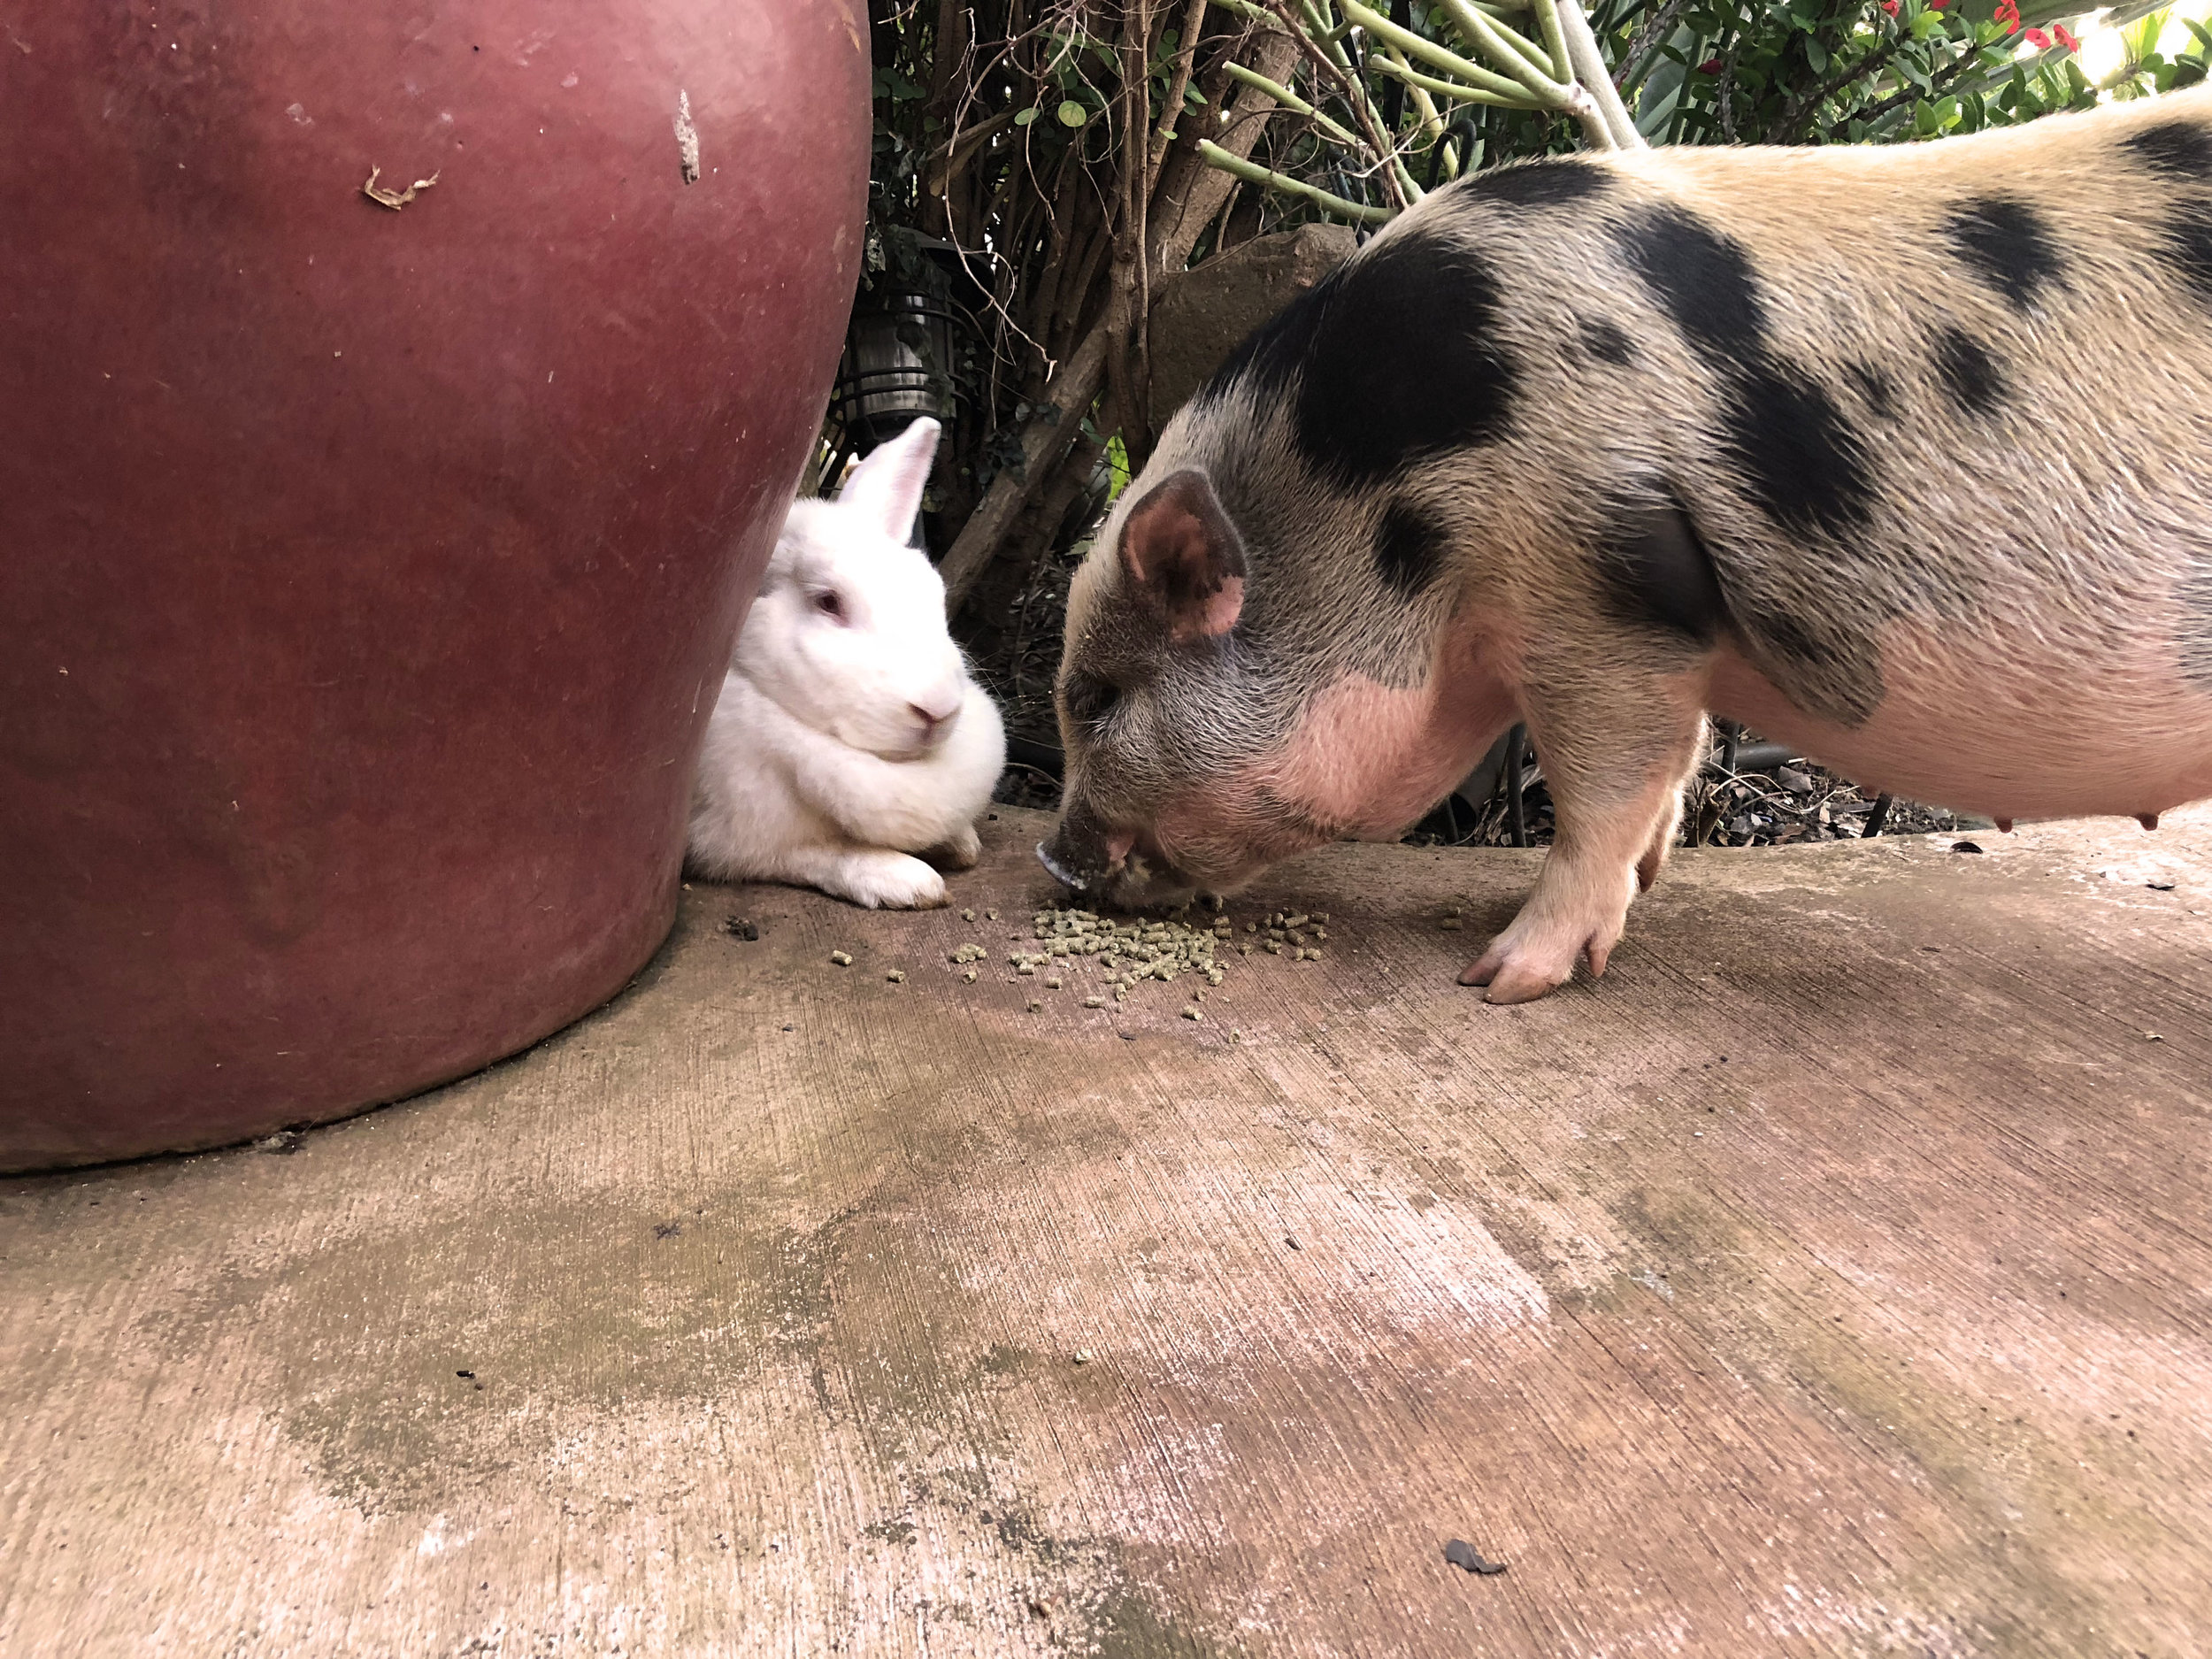 Sharing is caring. "Pua" stealing "Snowy's" food.